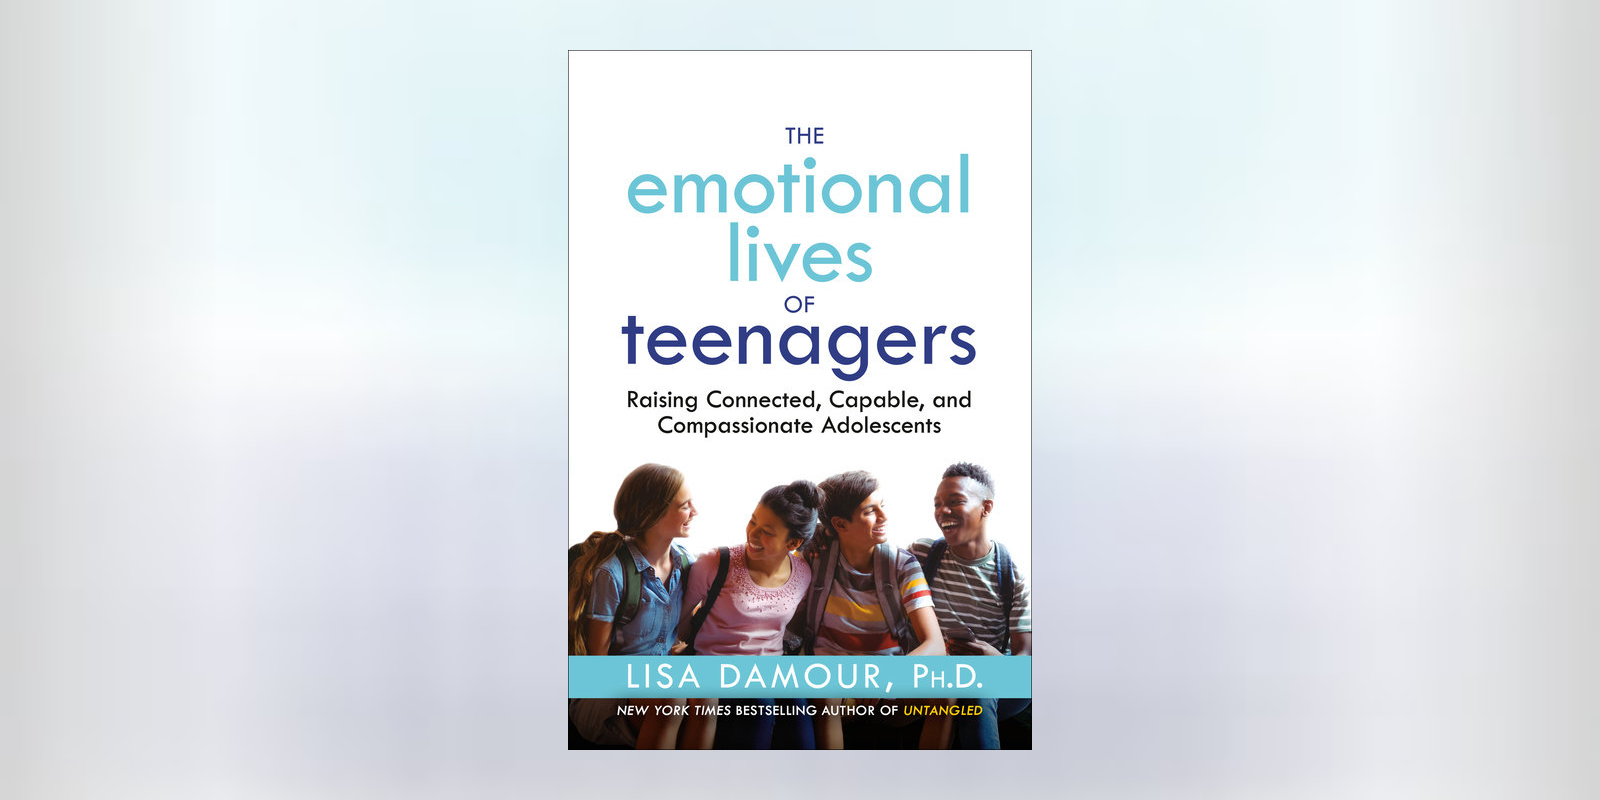 FROM THE PAGE: An Excerpt from Lisa Damour, Ph.D.’s <i>The Emotional Lives of Teenagers</i>